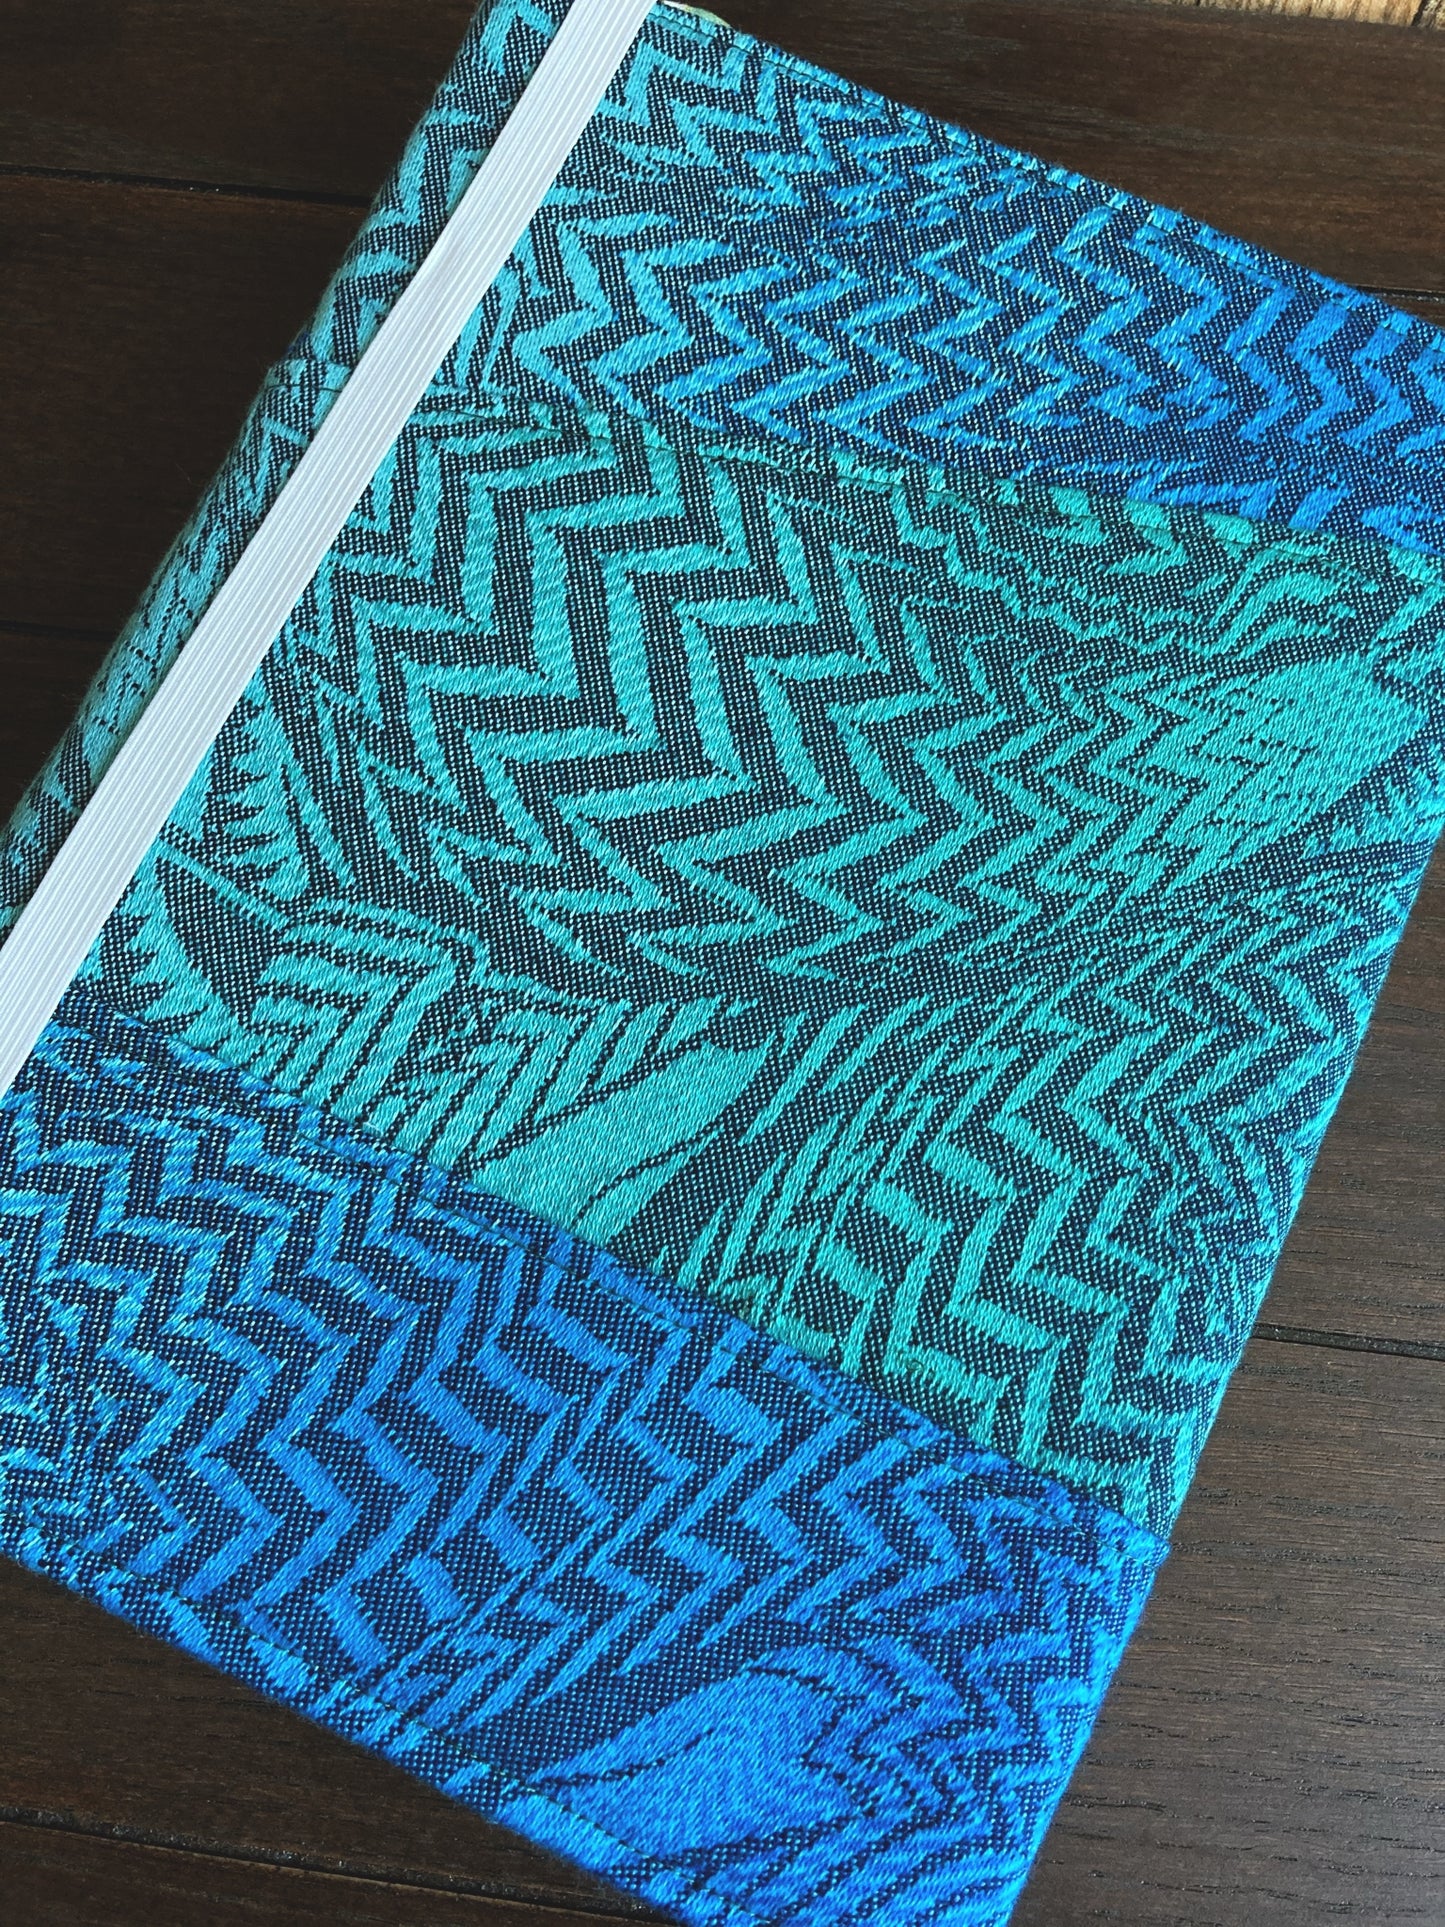 Boho Foxes in Blues Journal and Notebook Cover